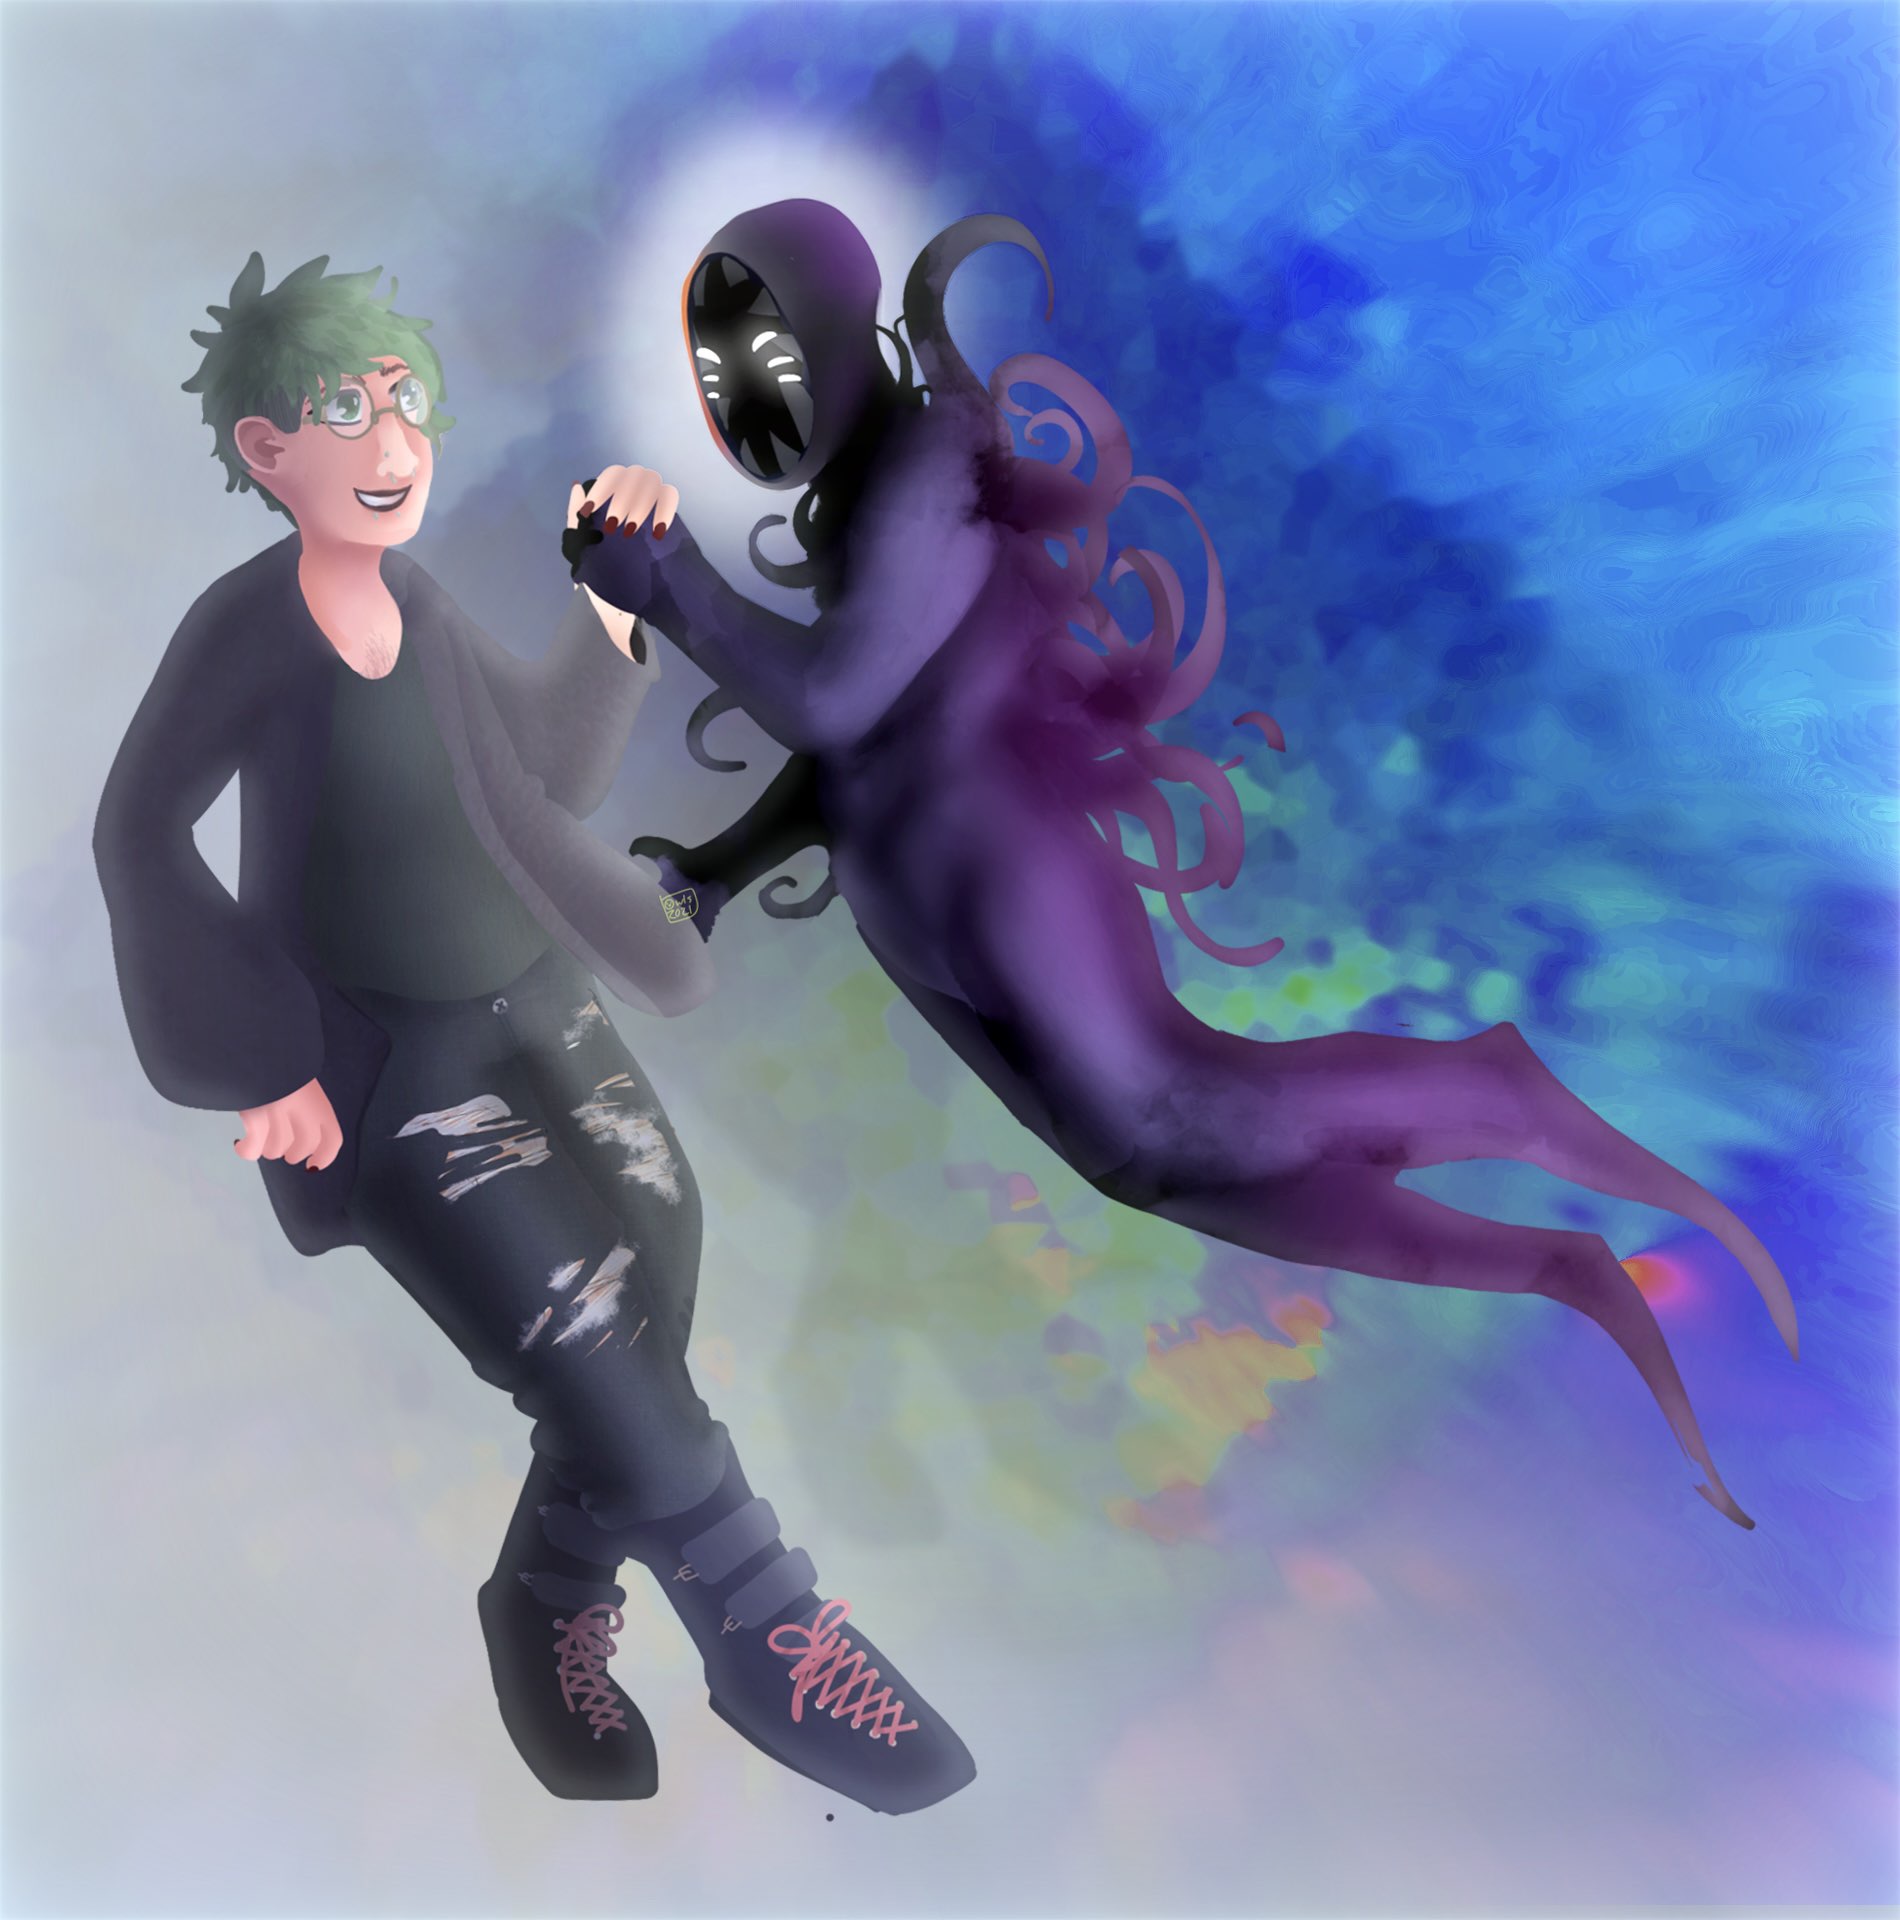 An eldritch humanoid holding hands with a green-haired human.